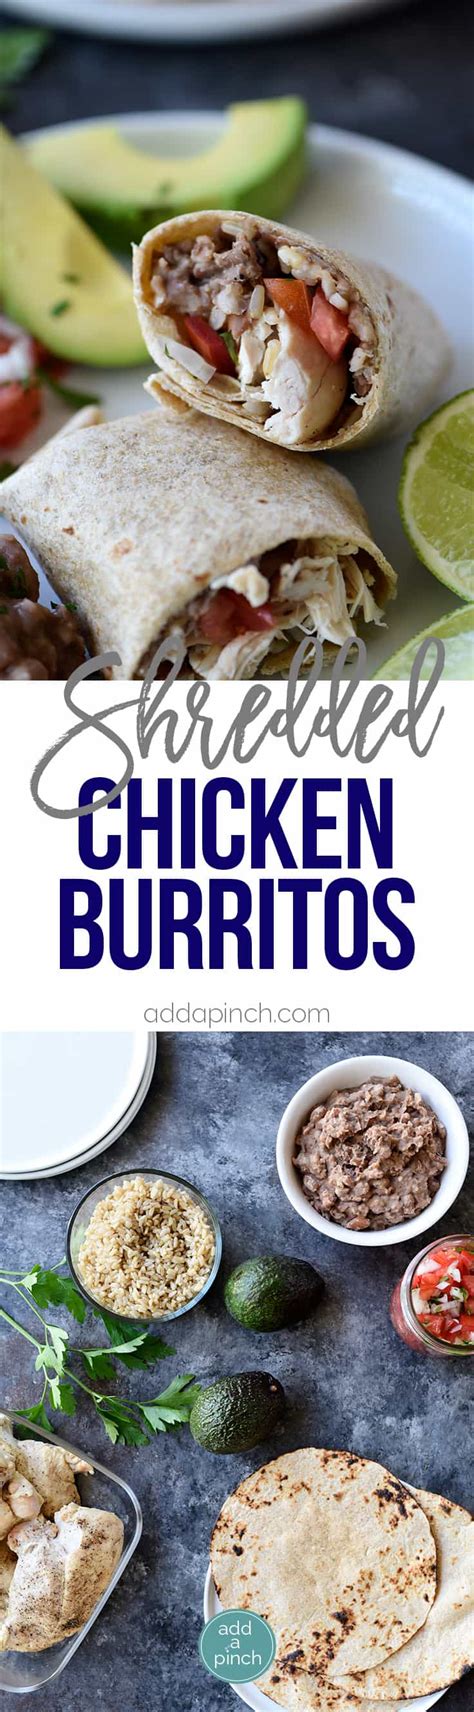 Remove from refrigerator 30 minutes before baking. Shredded Chicken Burritos Recipe - Add a Pinch